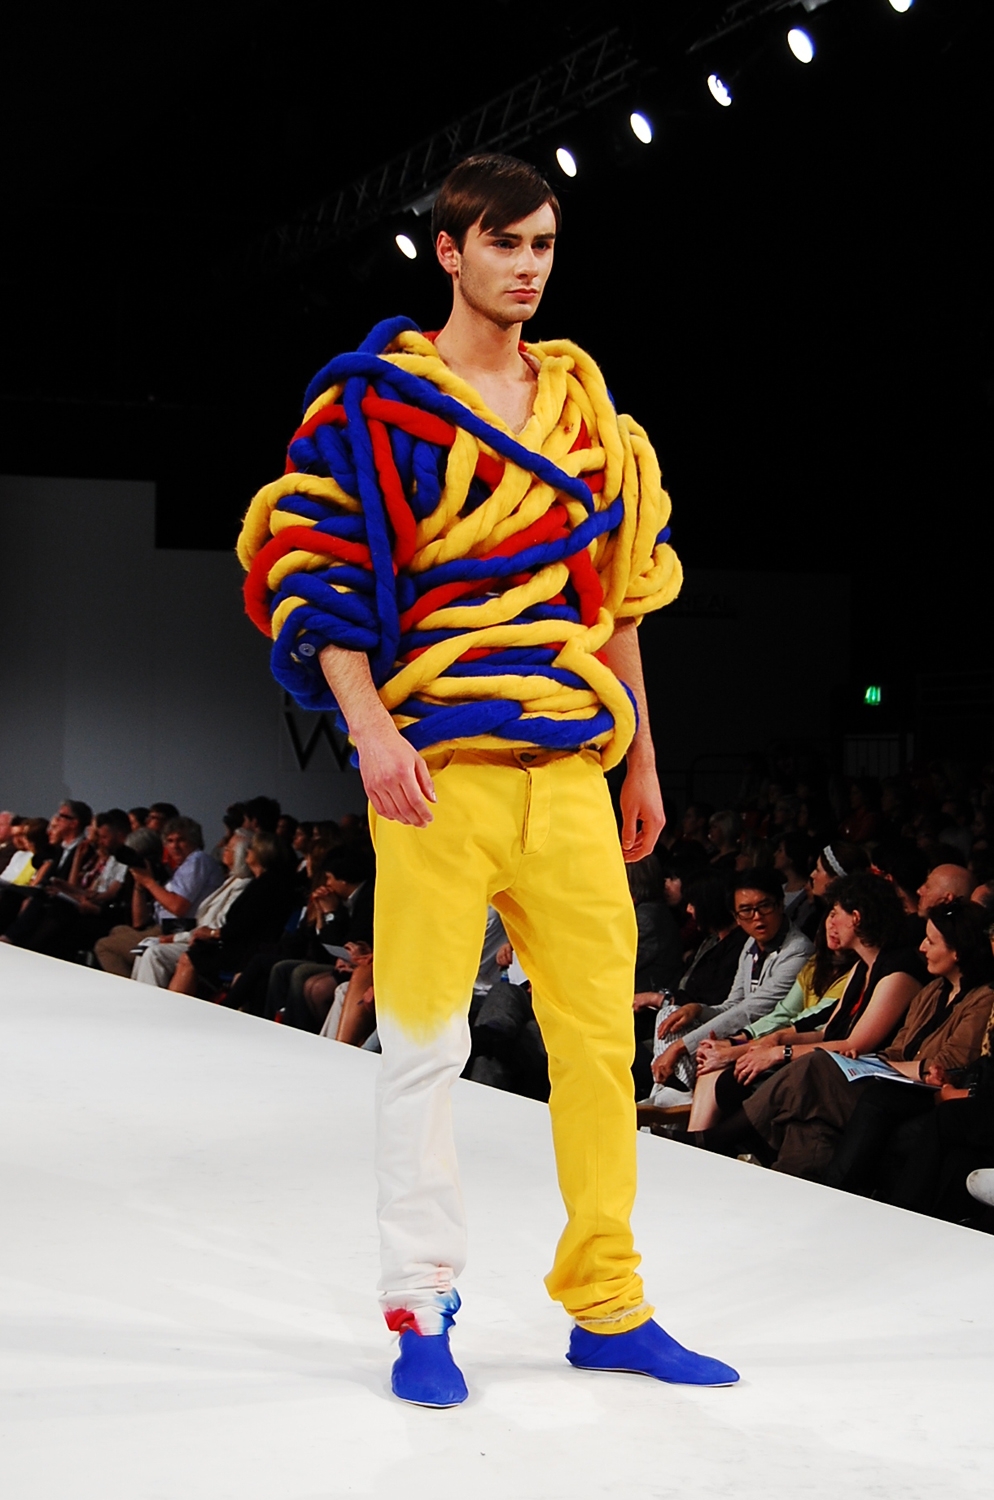 menswear collection 'do not construct the fashion, let the fashion construct itself', 2010